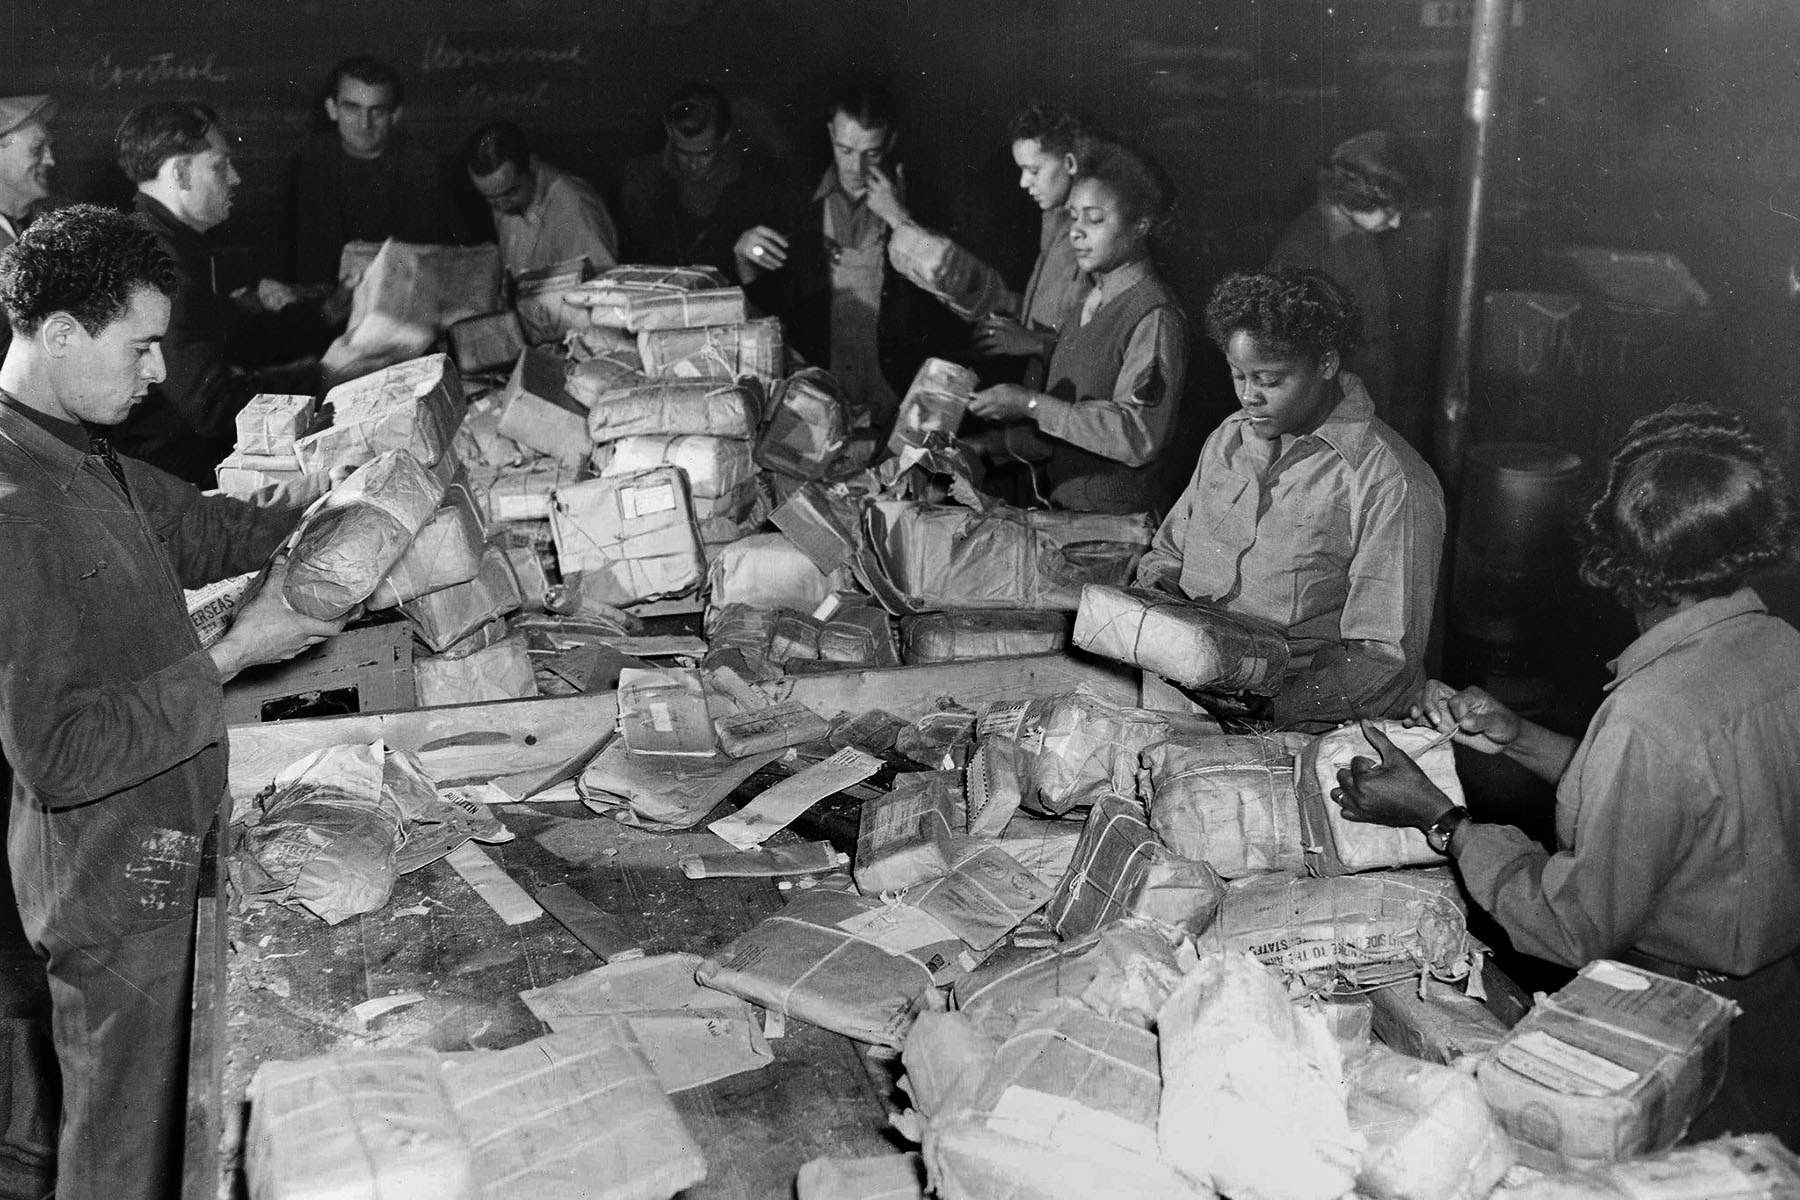 Members of the 6888th battalion and postal employees sort mail.